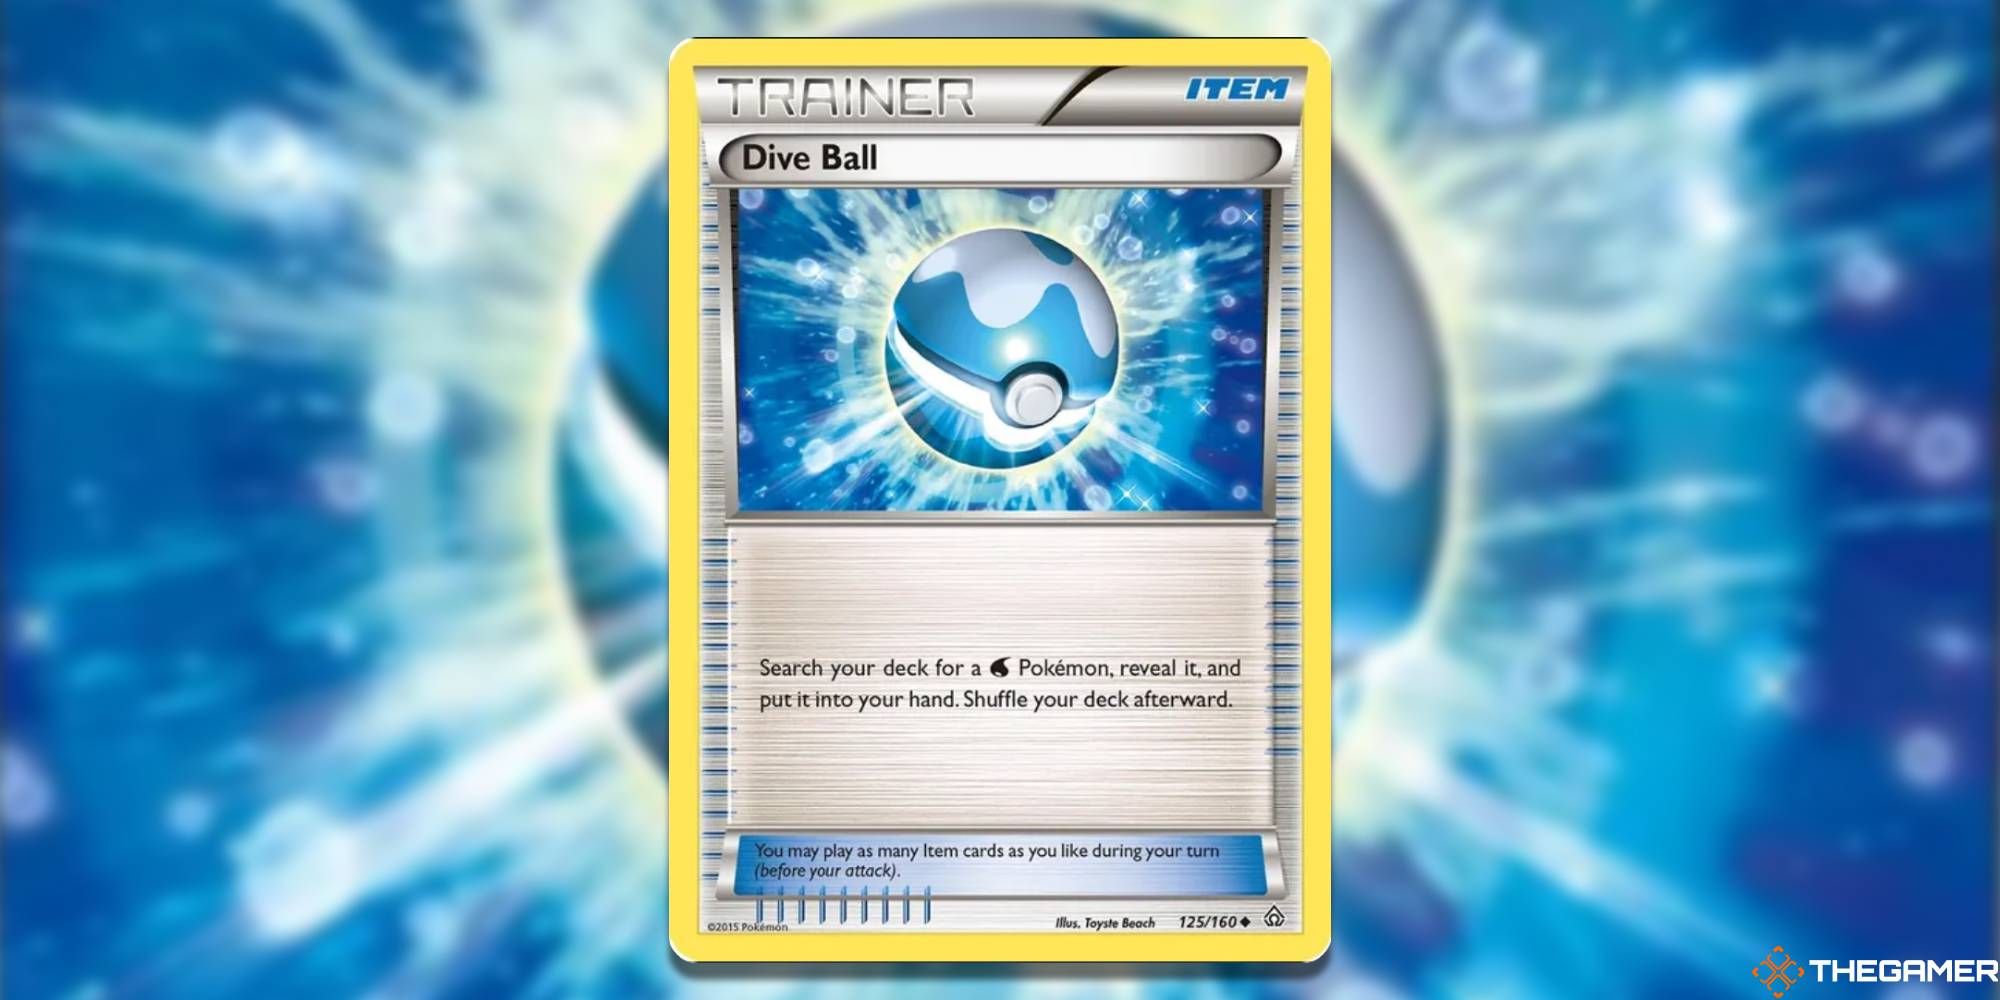 Dive Ball from the Pokemon TCG, with blurred background